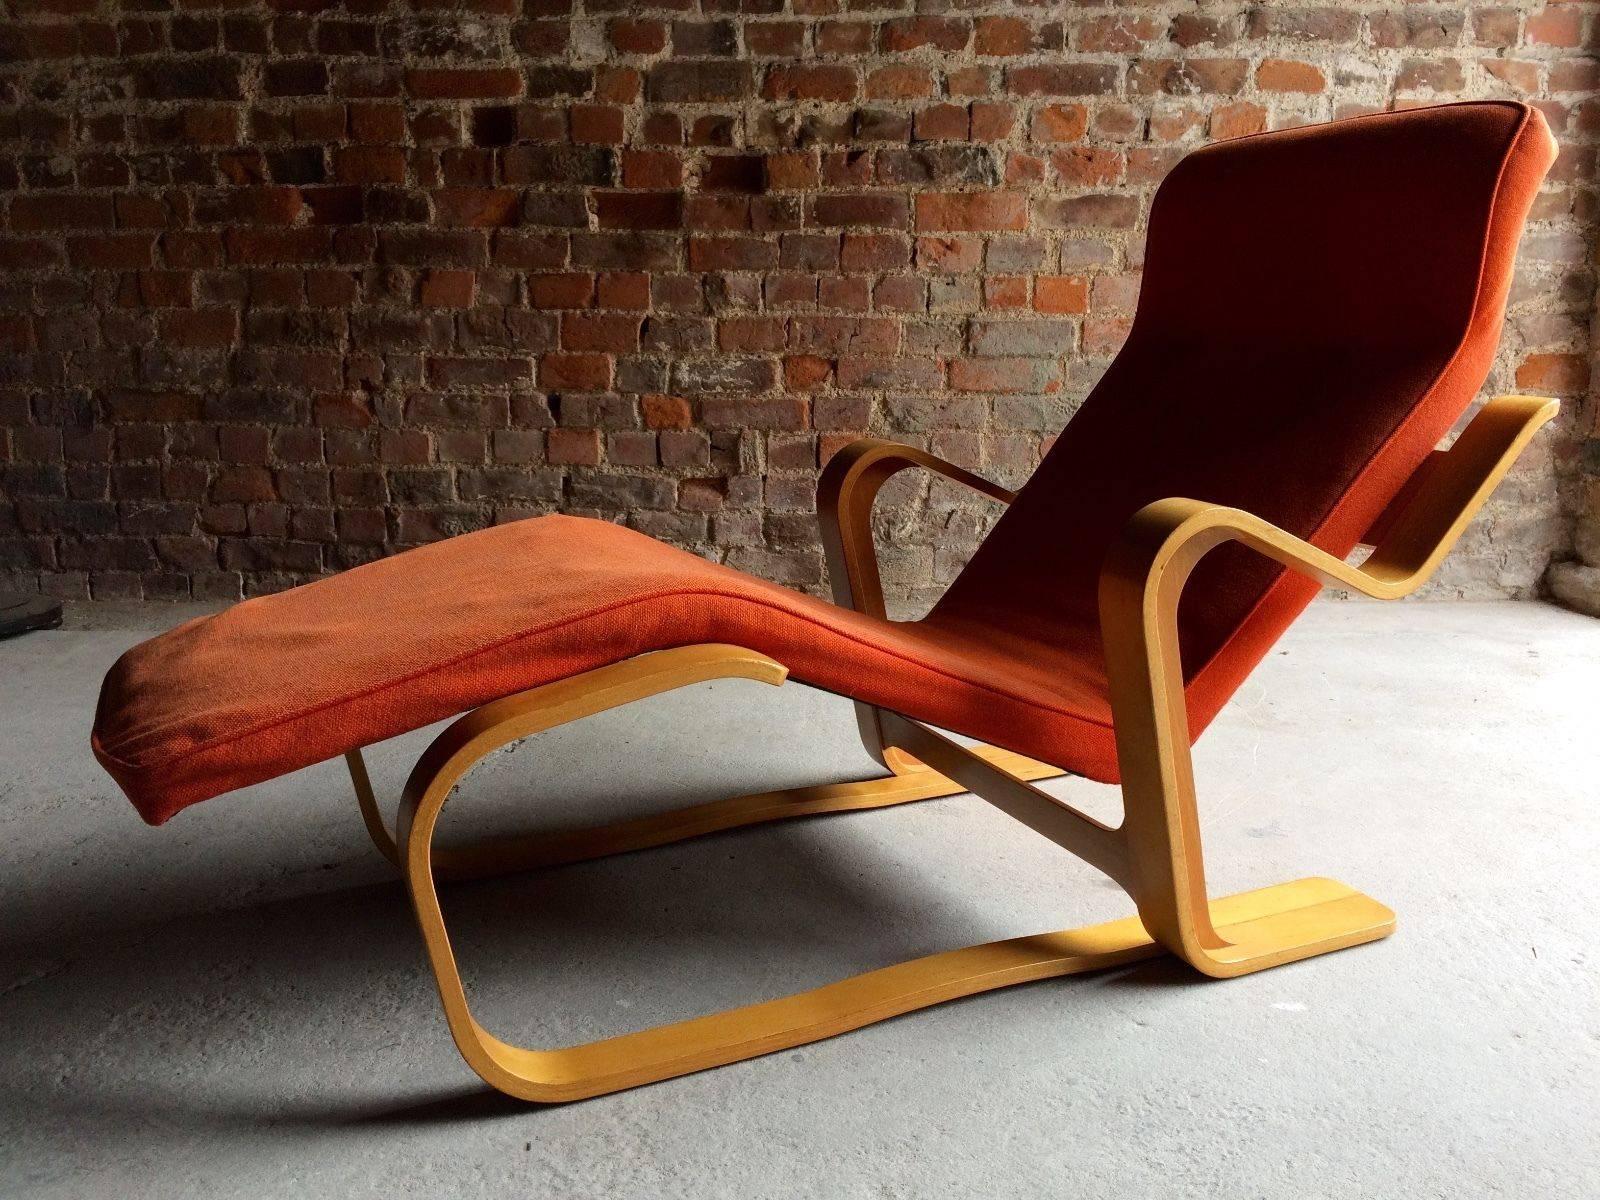 Marcel Breuer Long Chair Chaise Longue, Mid-Century, 1970s Bauhaus In Good Condition In Longdon, Tewkesbury